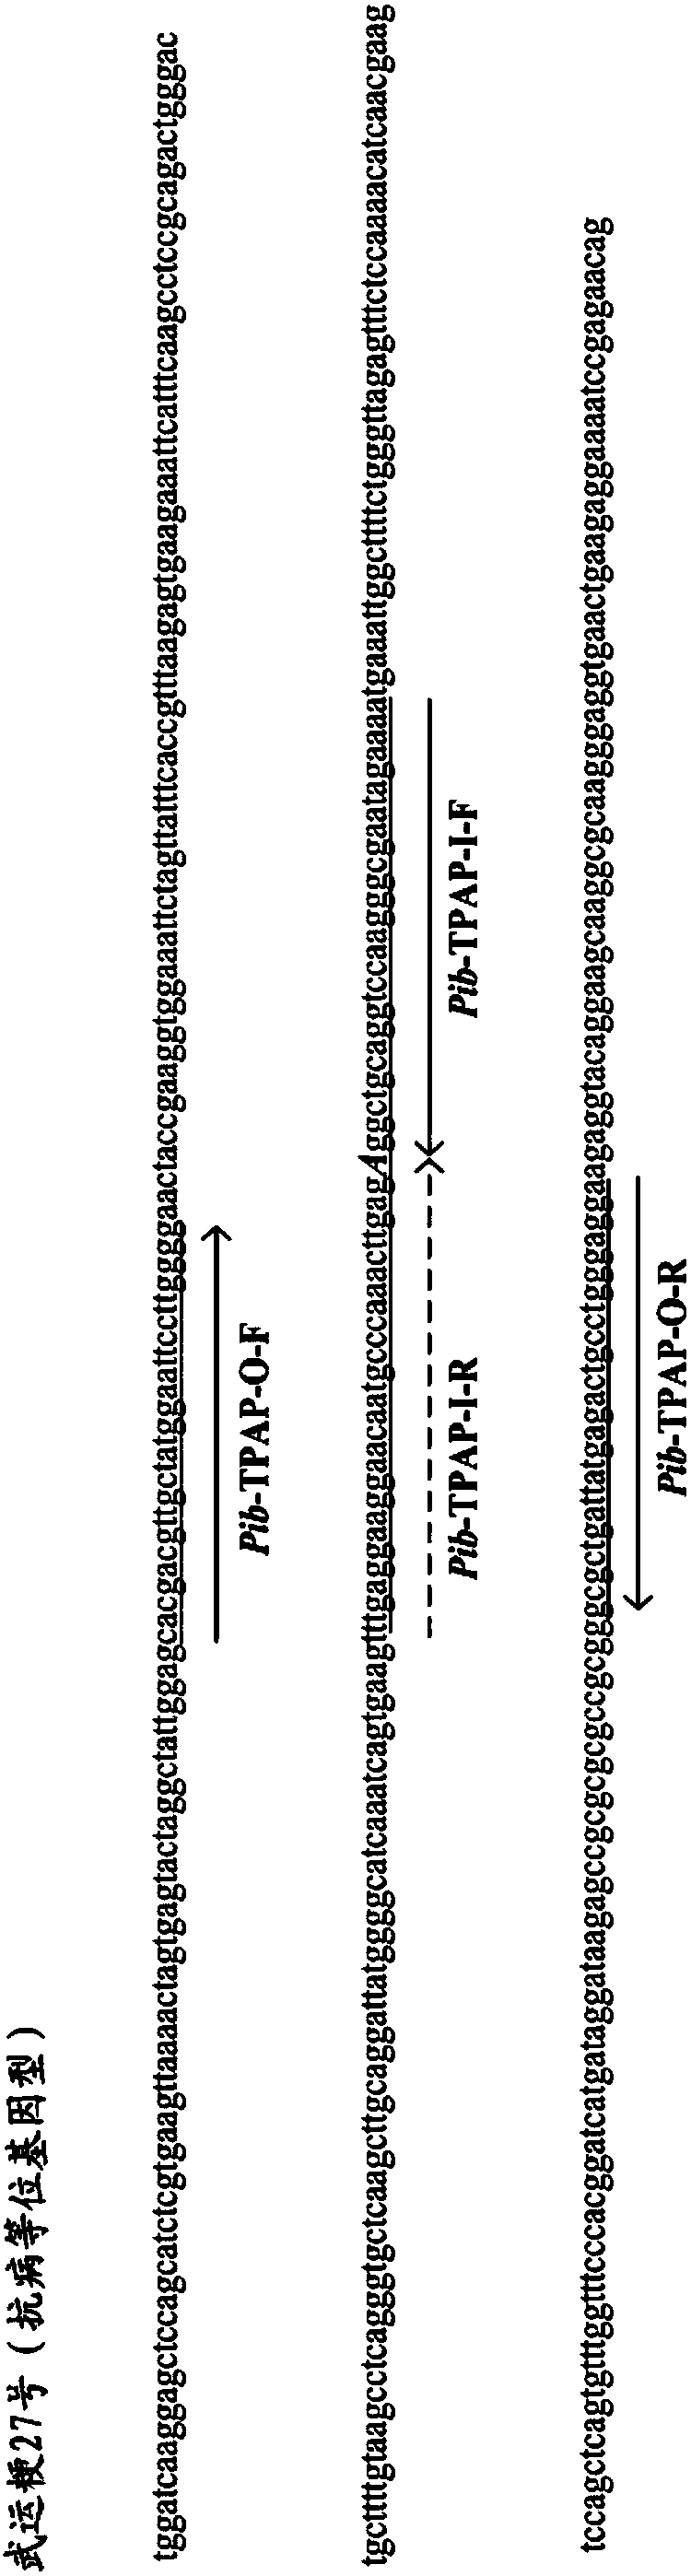 Molecular marker for identifying resistance traits of Phyricularia oryzae, identification method and application